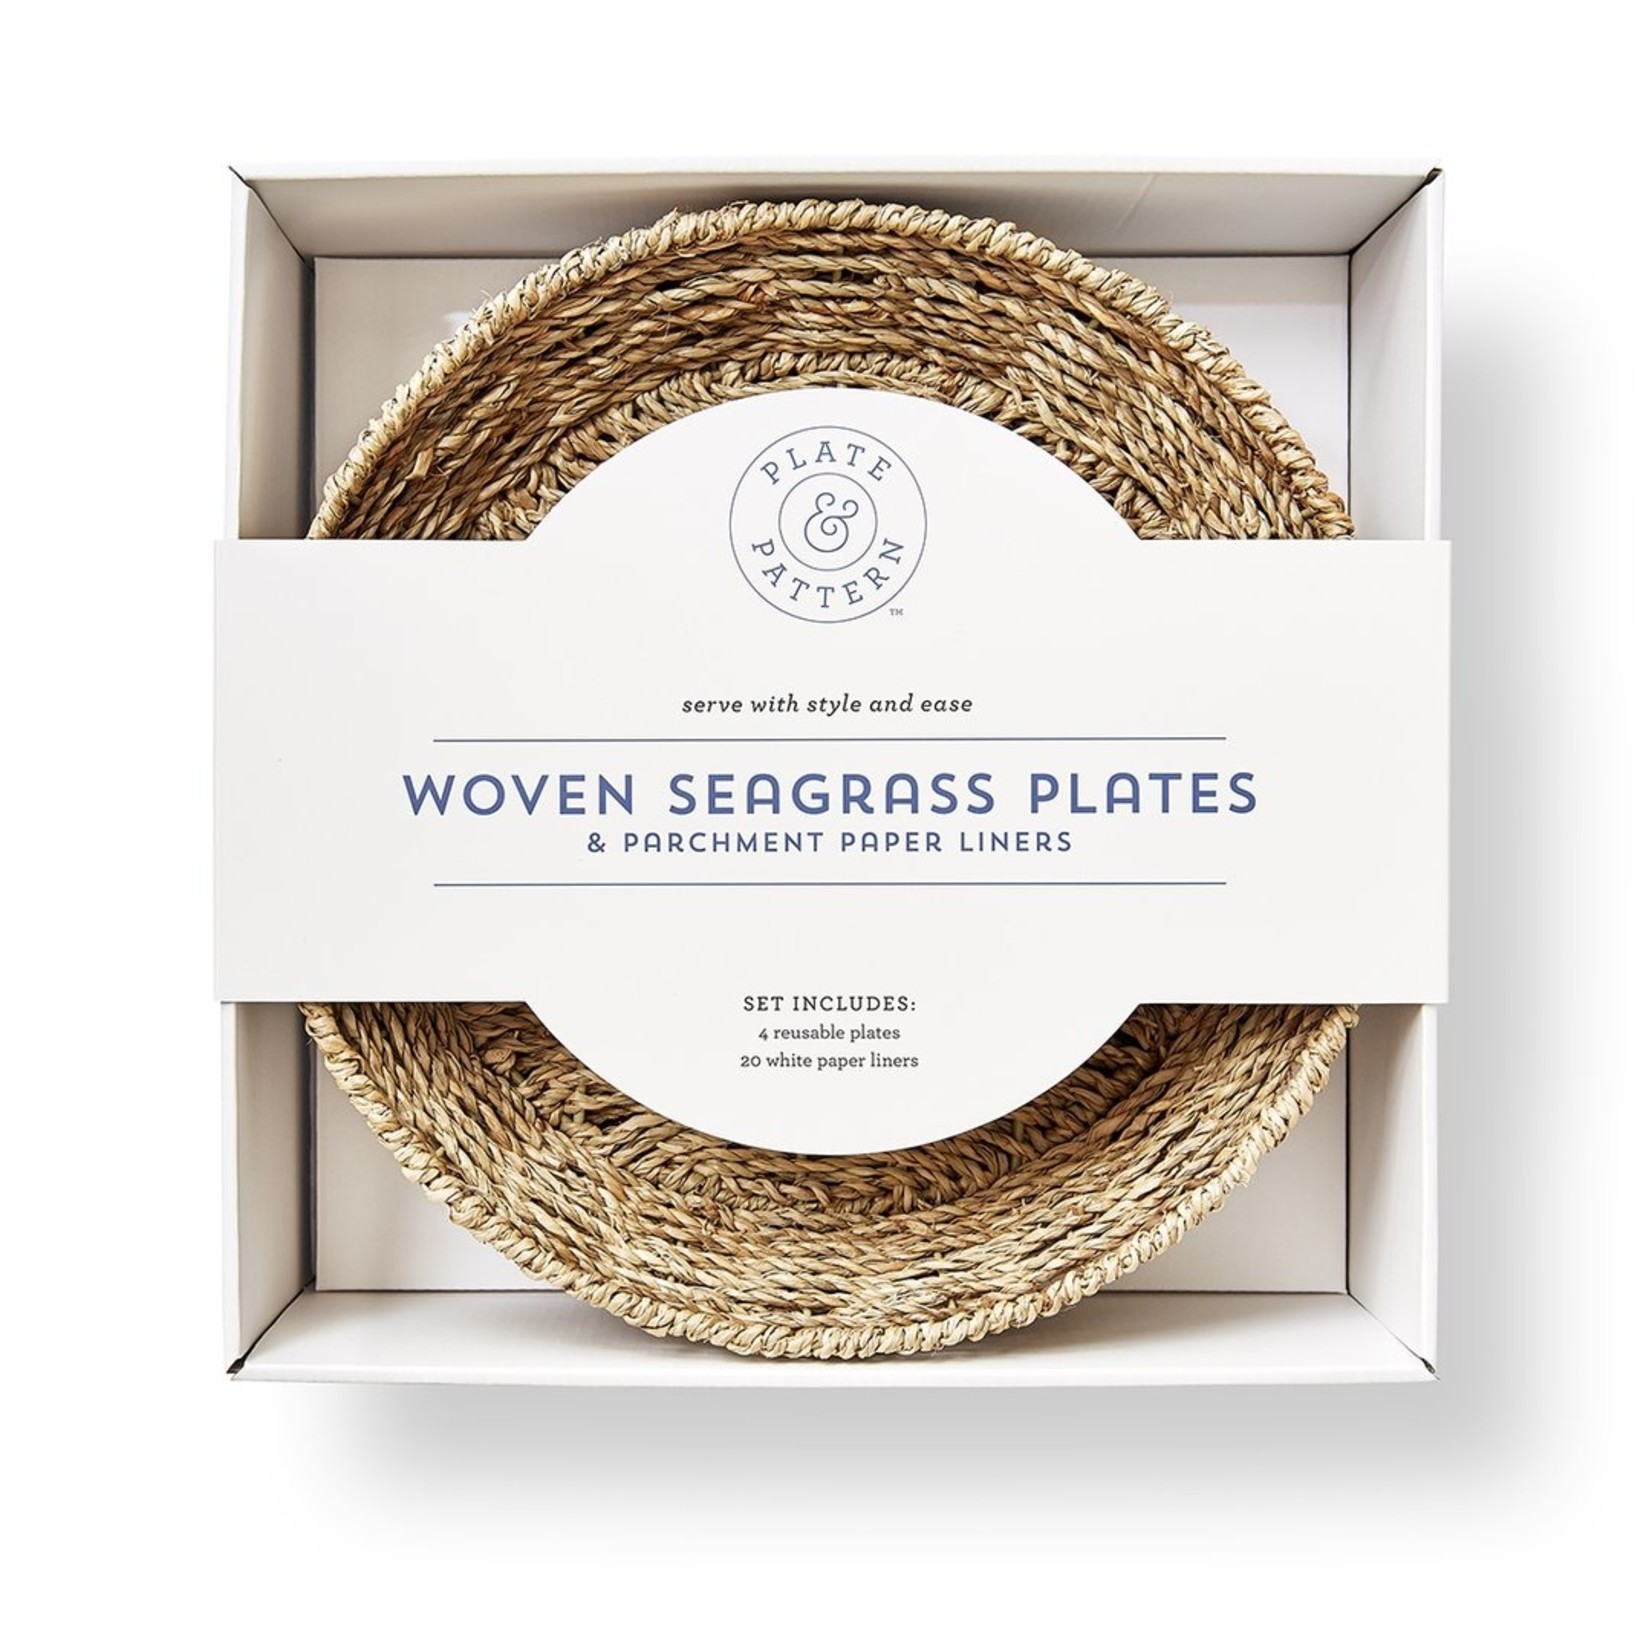 Plate & Pattern Woven Seagrass Plates & Parchment Paper Liners